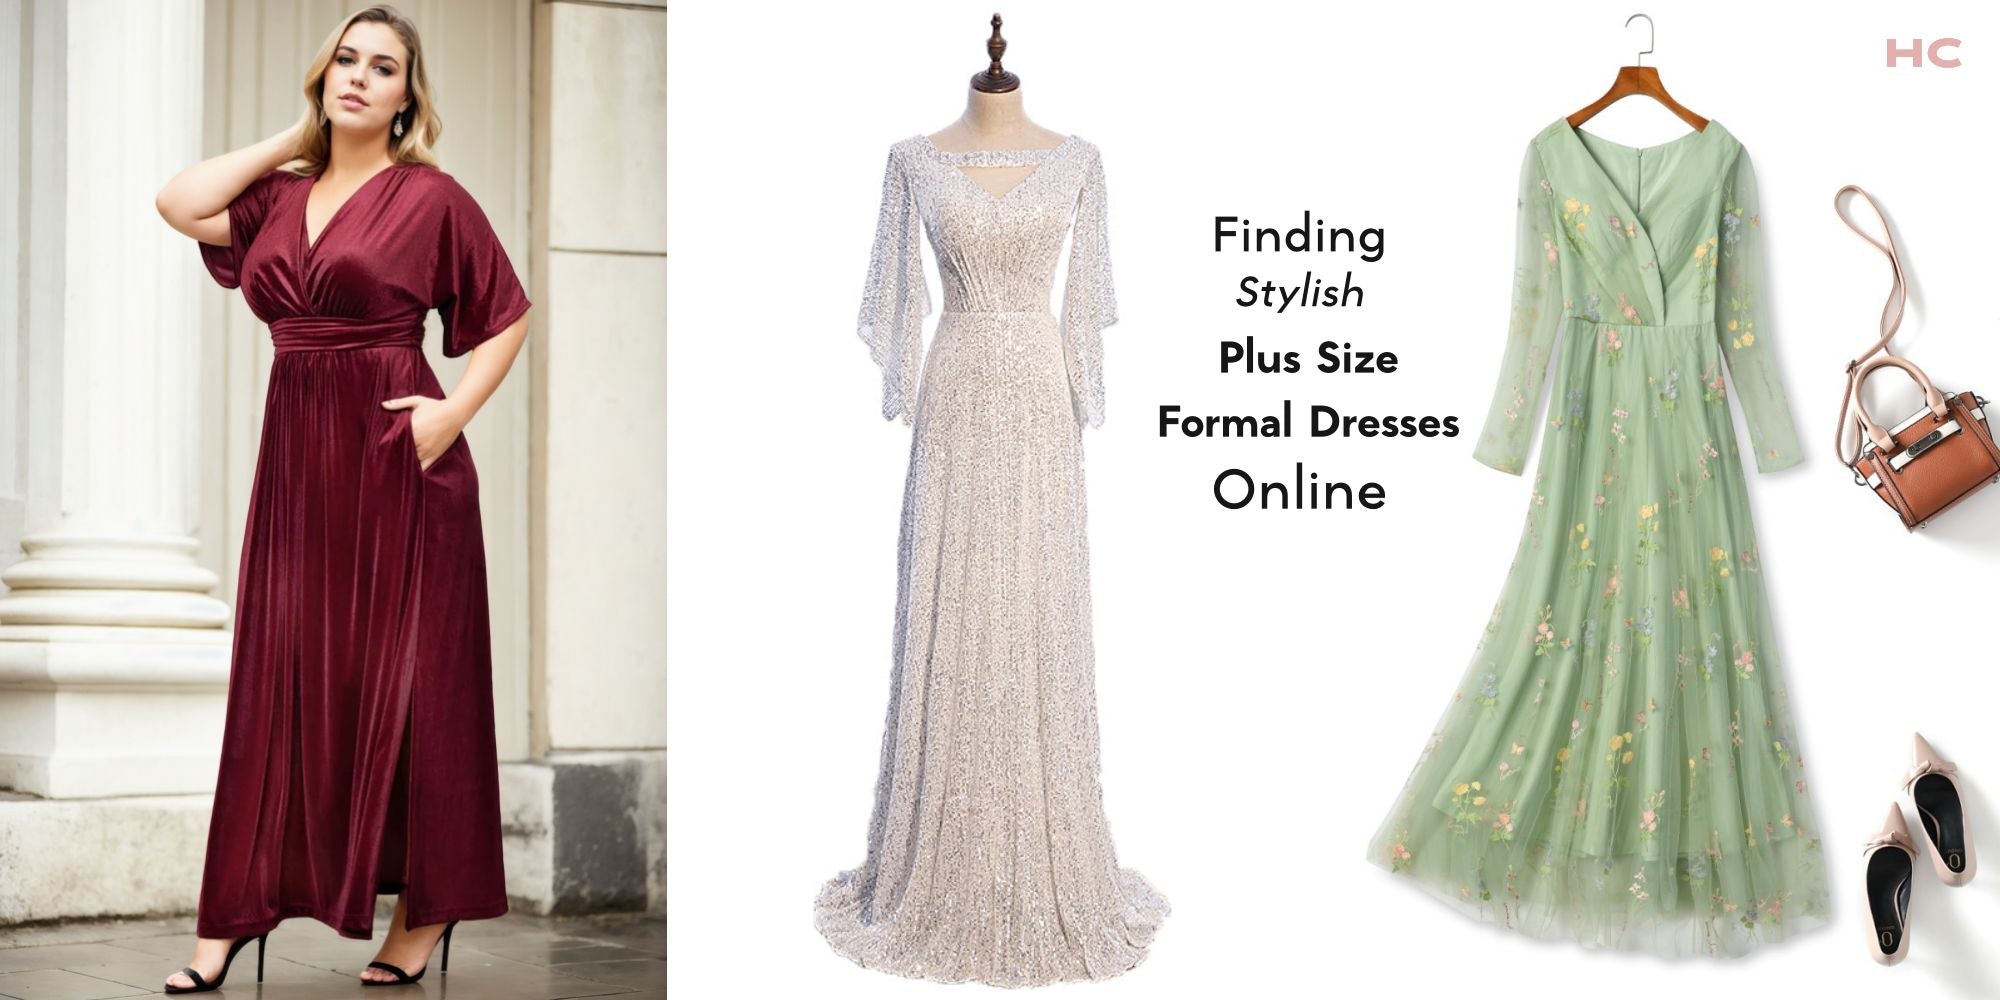 Finding Stylish Plus Size Formal Dresses Online: A Comprehensive Guide